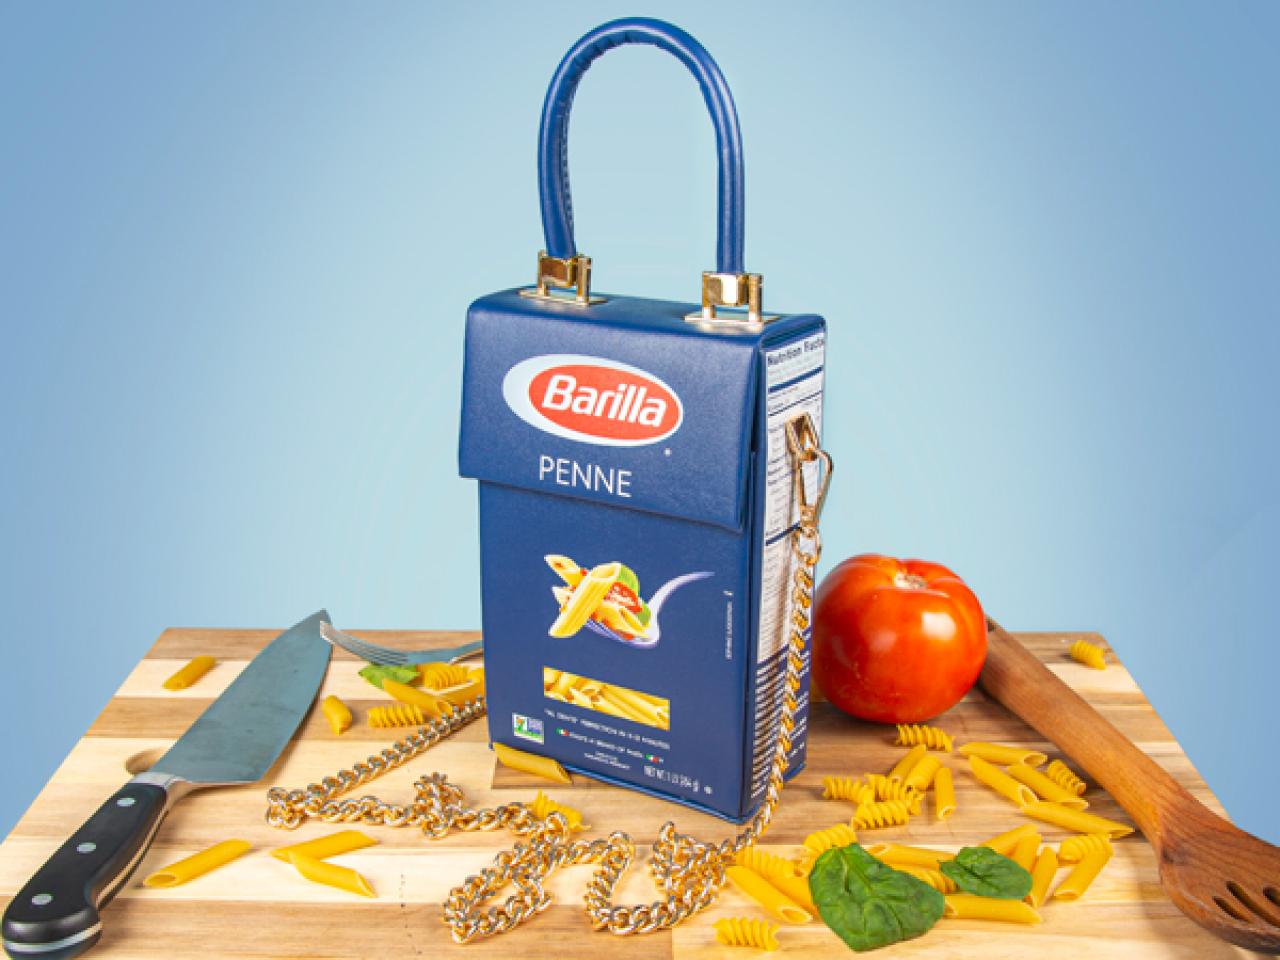 Where to Get the Barilla | : and Network | Box Penne Network FN Food Best Pasta Food Food Recipes - Dish Behind-the-Scenes, Purse Trends